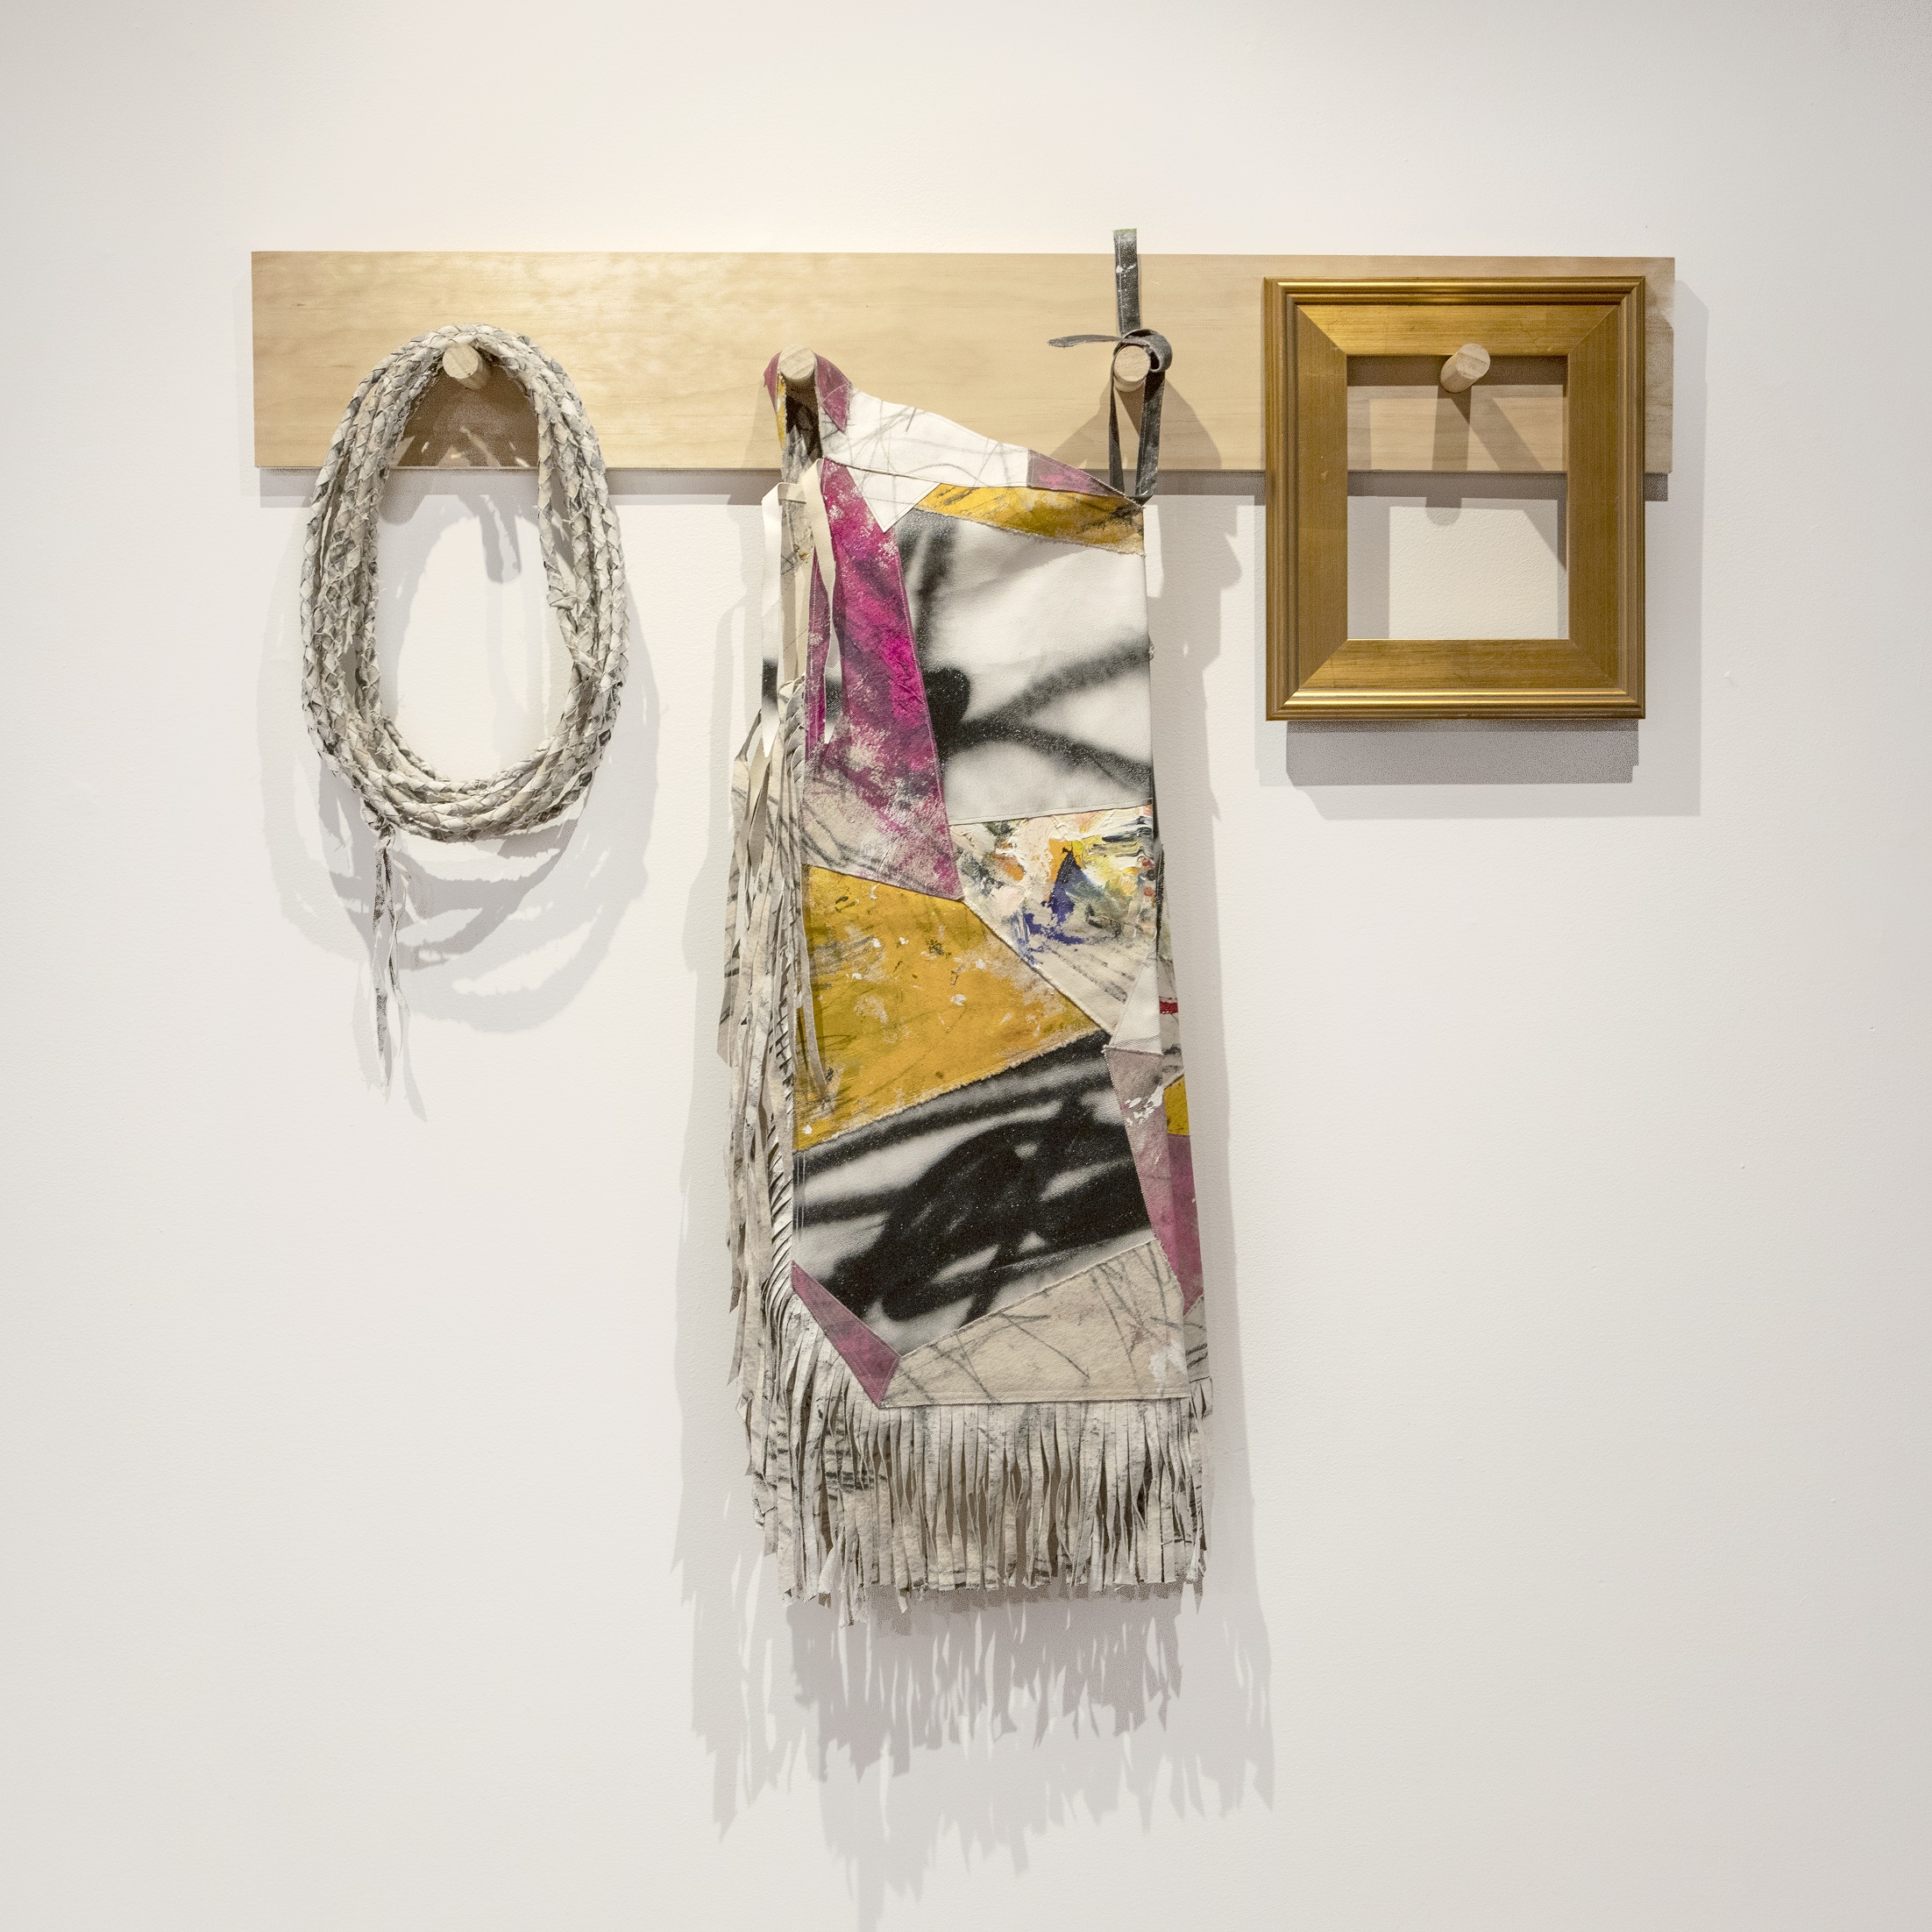 

											Patrick Dean Hubbell</b>

											<em>
												Tack Room</em> 

											<h4>
												Santa Fe: August 12 – October 22, 2022											</h4>

		                																																													<i>Repurposed Cowboy Portrait,</i>  
																																								2022, 
																																								Oil, Acrylic, charcoal, oil pastel, spray paint, sewn thread on canvas, reclaimed wood, wood frame, hand braided canvas ranch rope, 
																																								54 x 48 x 4 inches 
																								
		                				